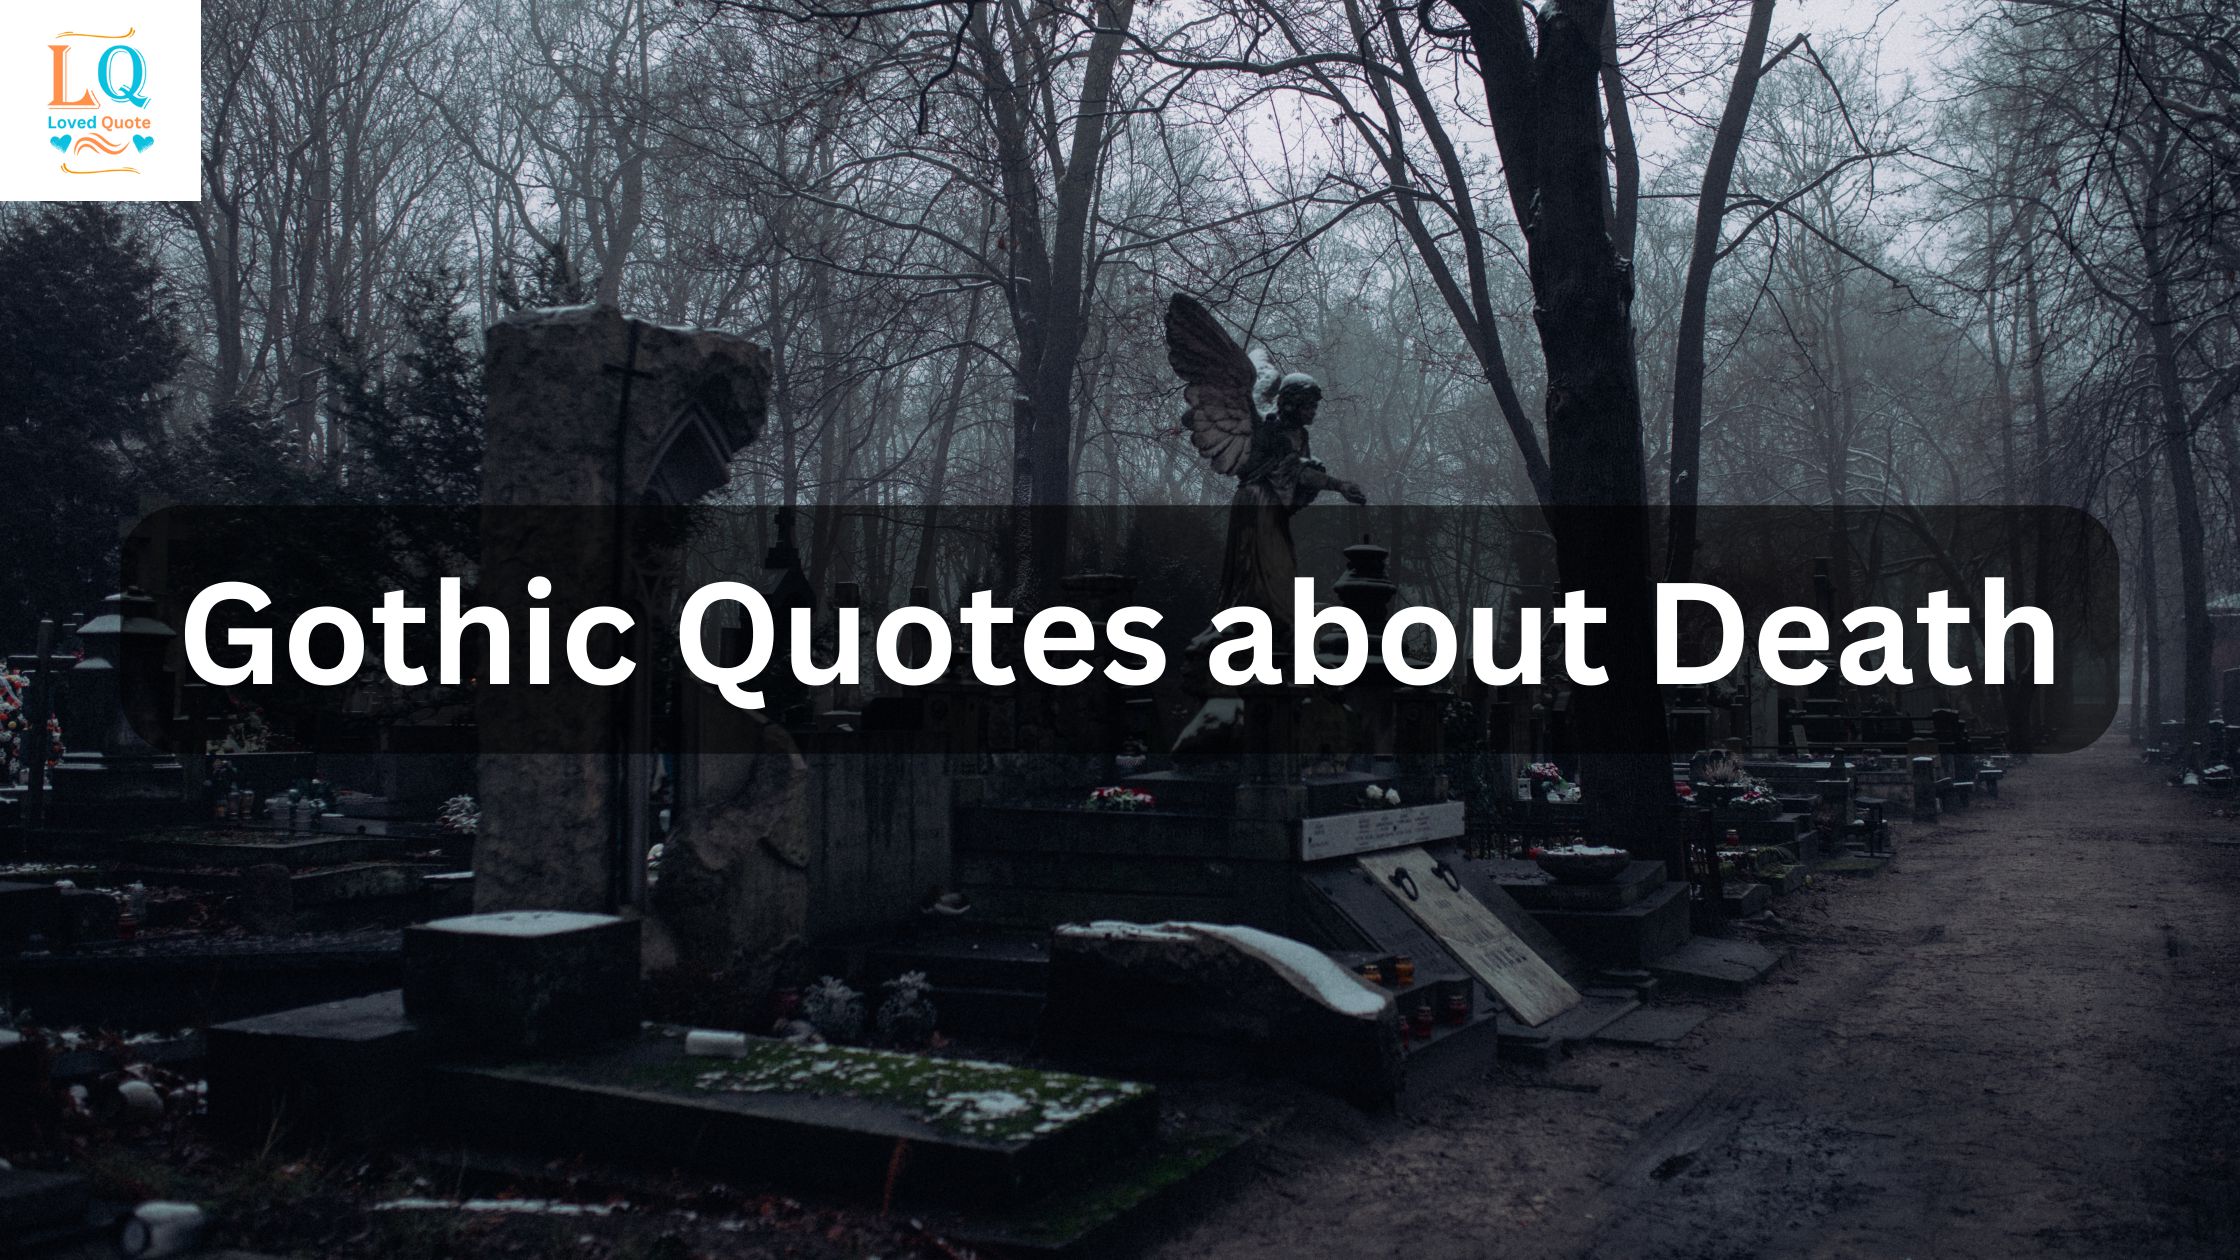 Gothic Quotes about Death